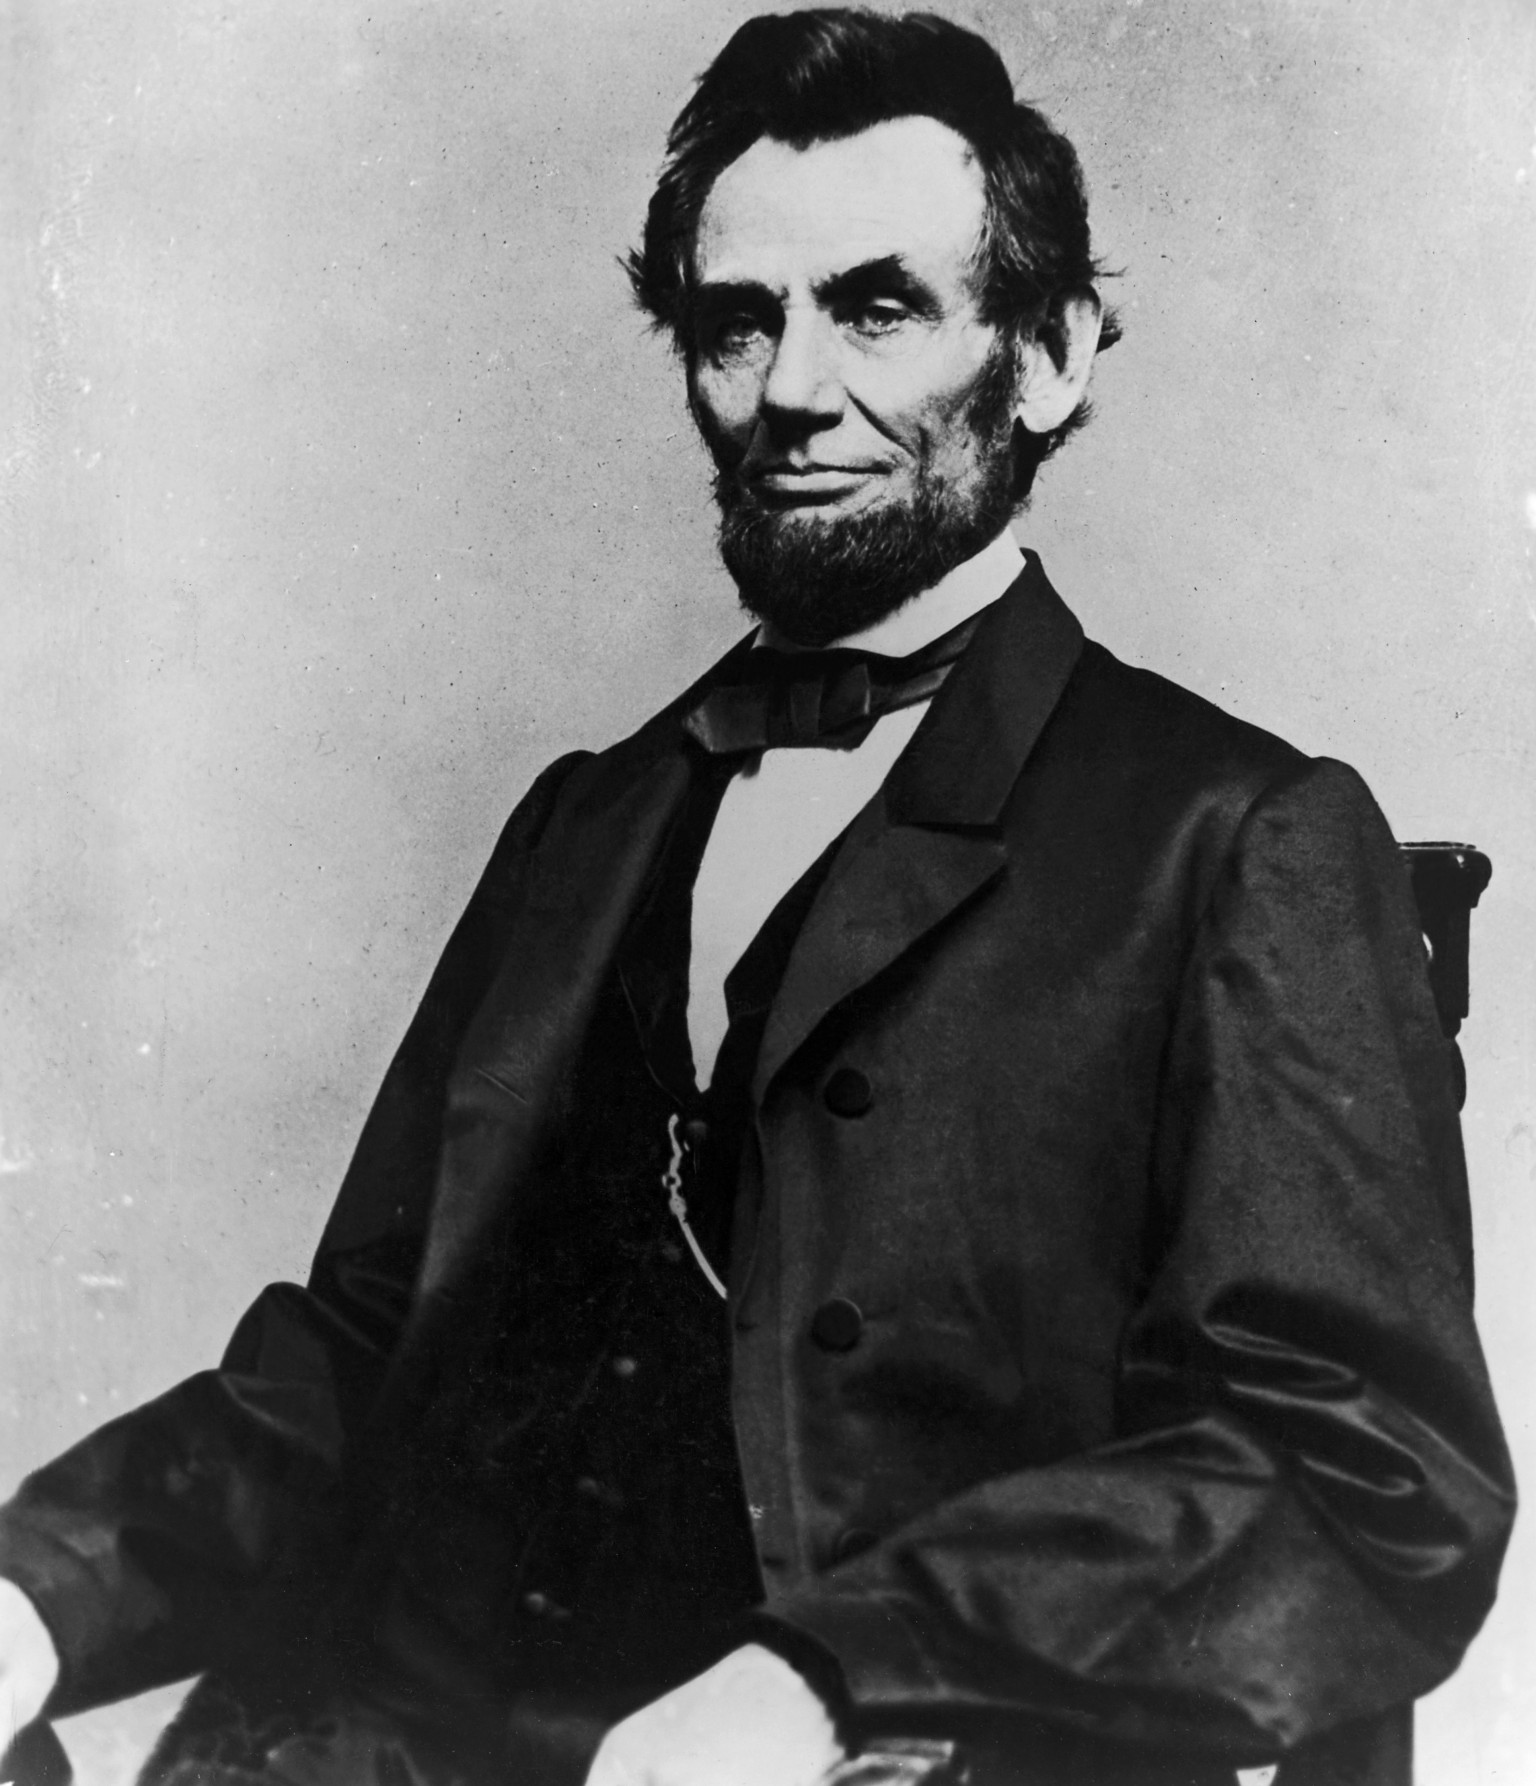 THE NEW REFORM CLUB Abraham Lincoln was not the father of big government